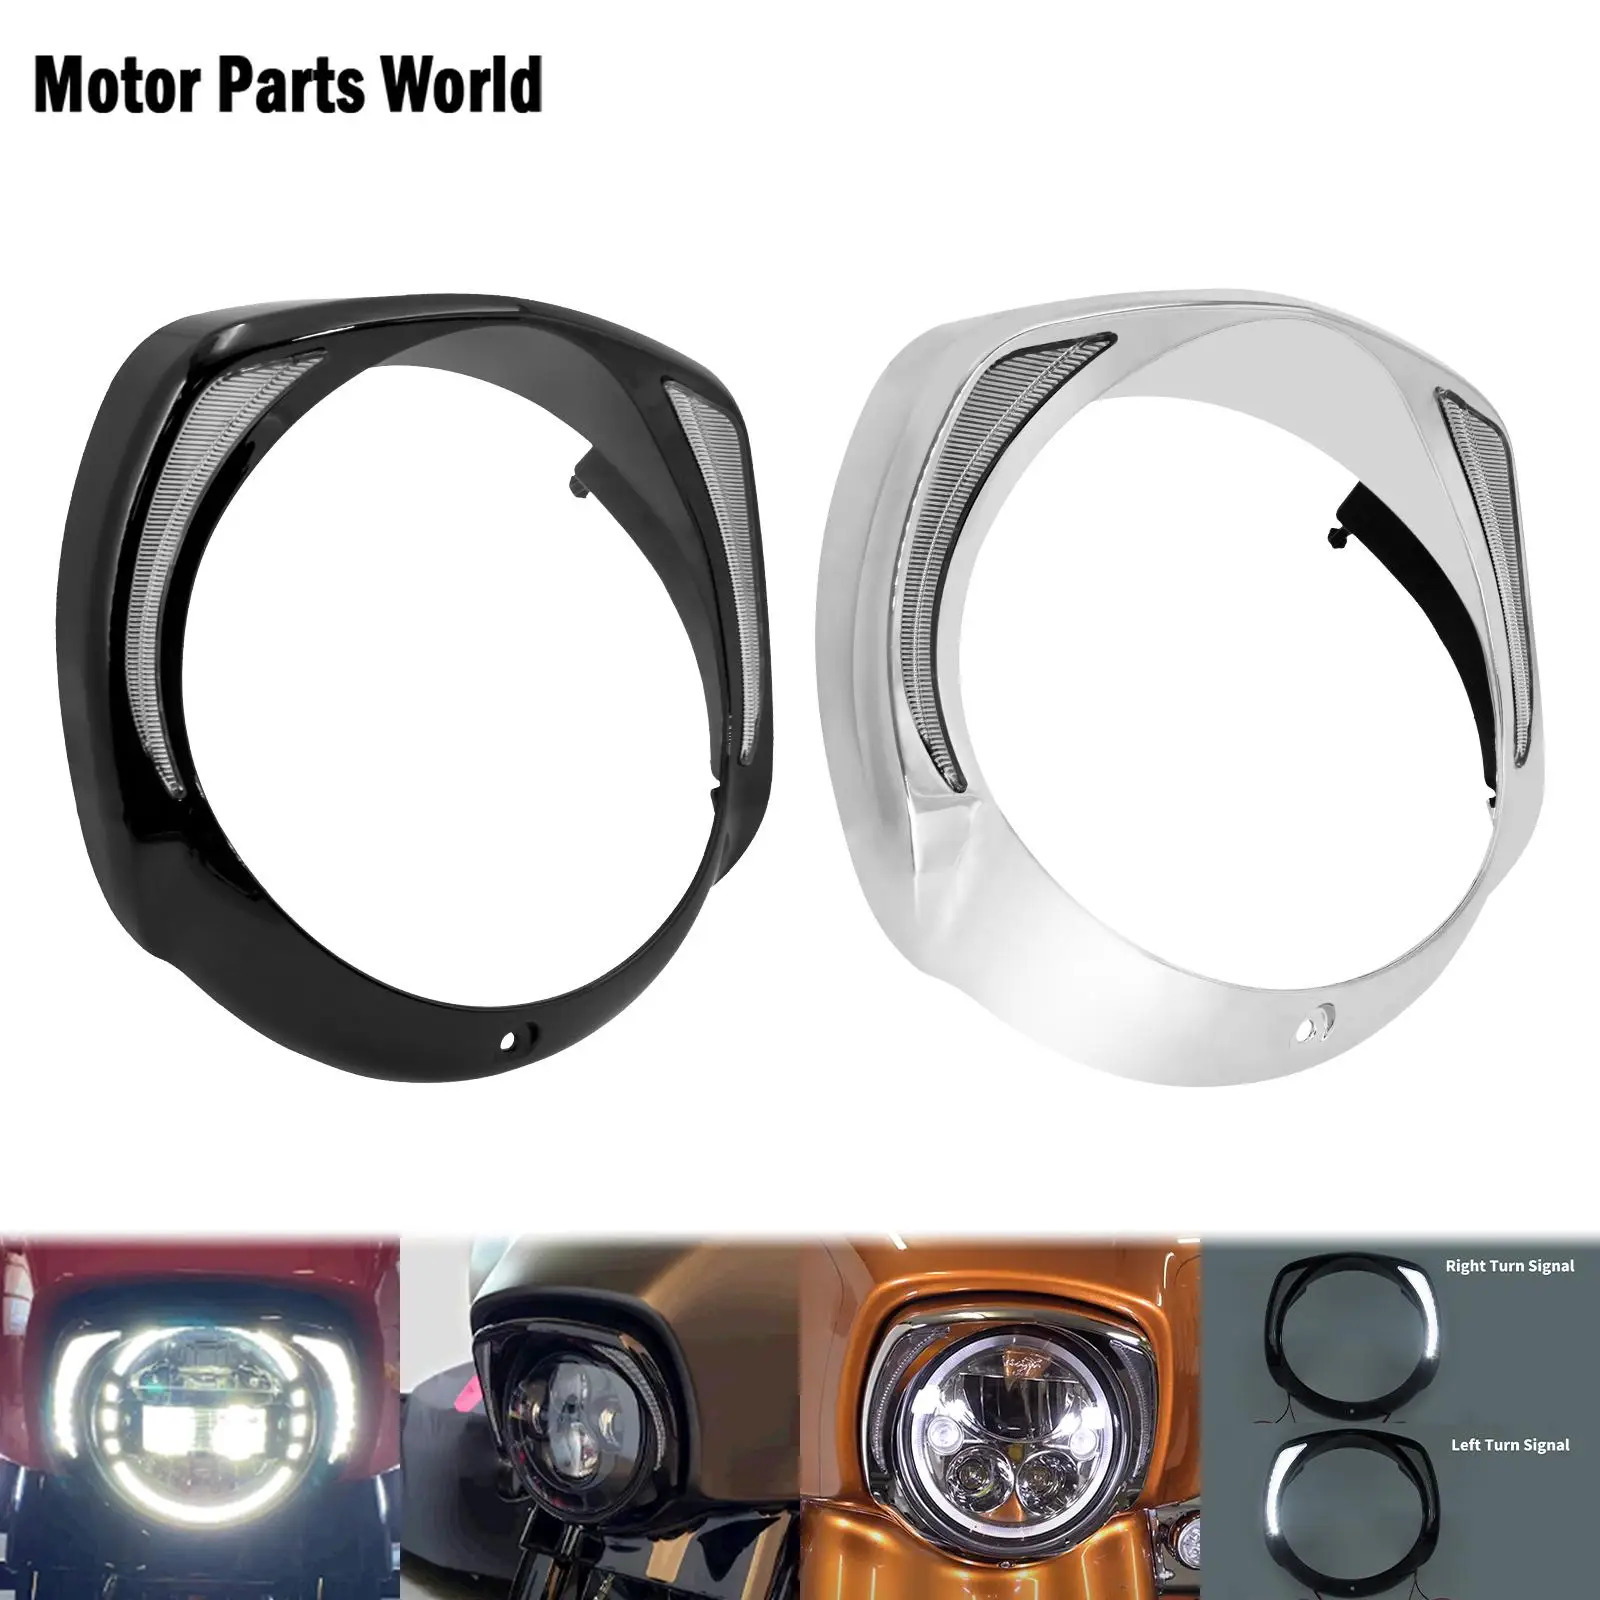 

7'' Motorcycle LED Headlight Bezel Batwing Fairing Cover Black/Chrome For Harley Touring Street Electra Glide Tri-Glide 2014-Up